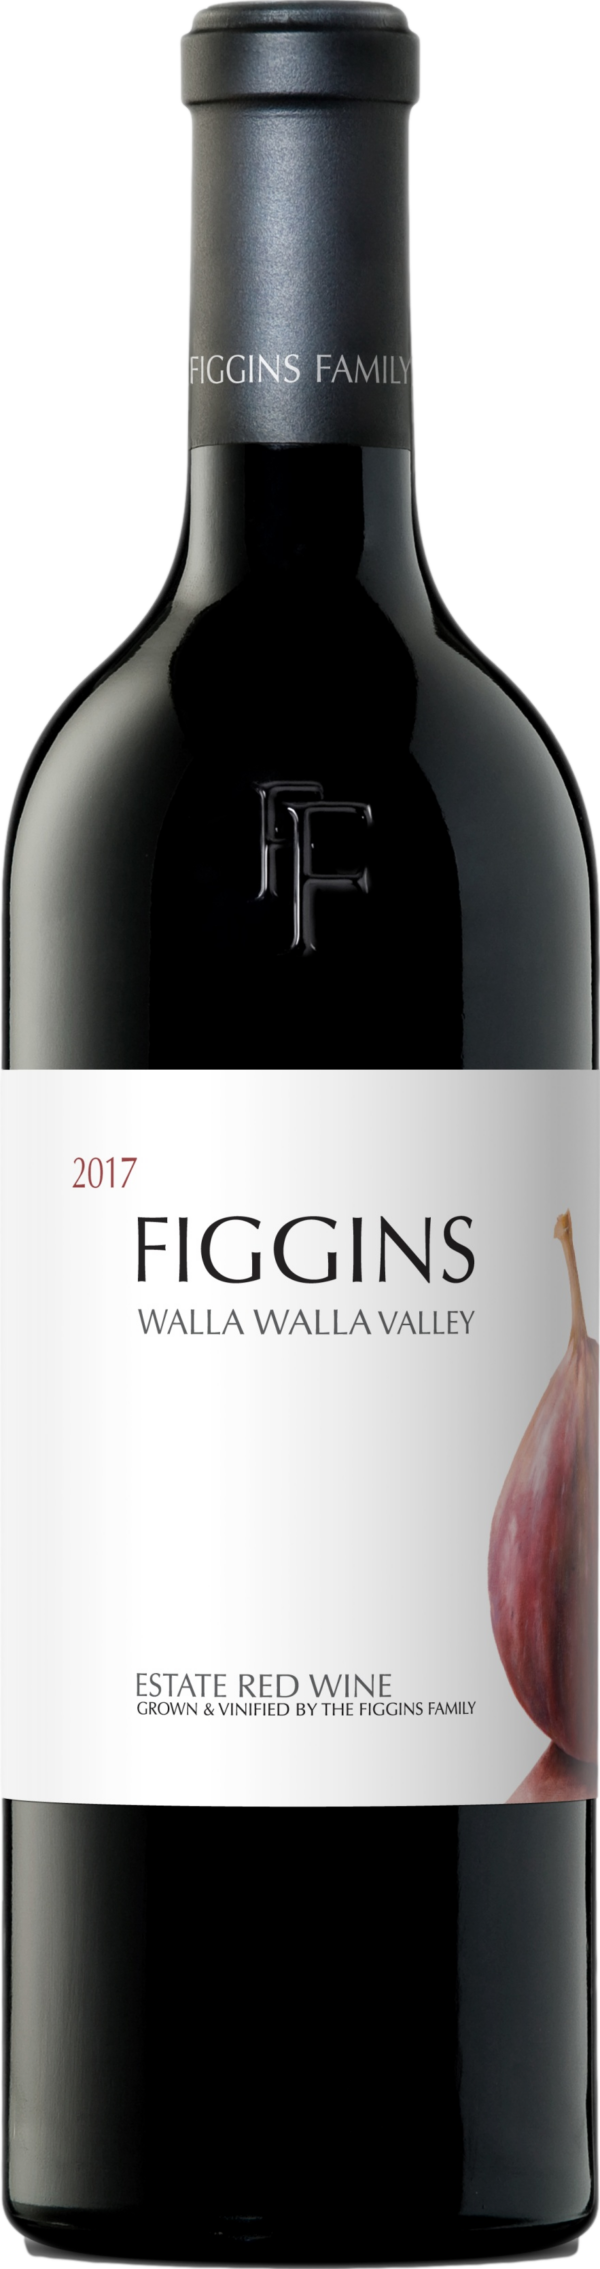 Product image of Figgins Walla Walla Valley Estate Red 2017 from 8wines